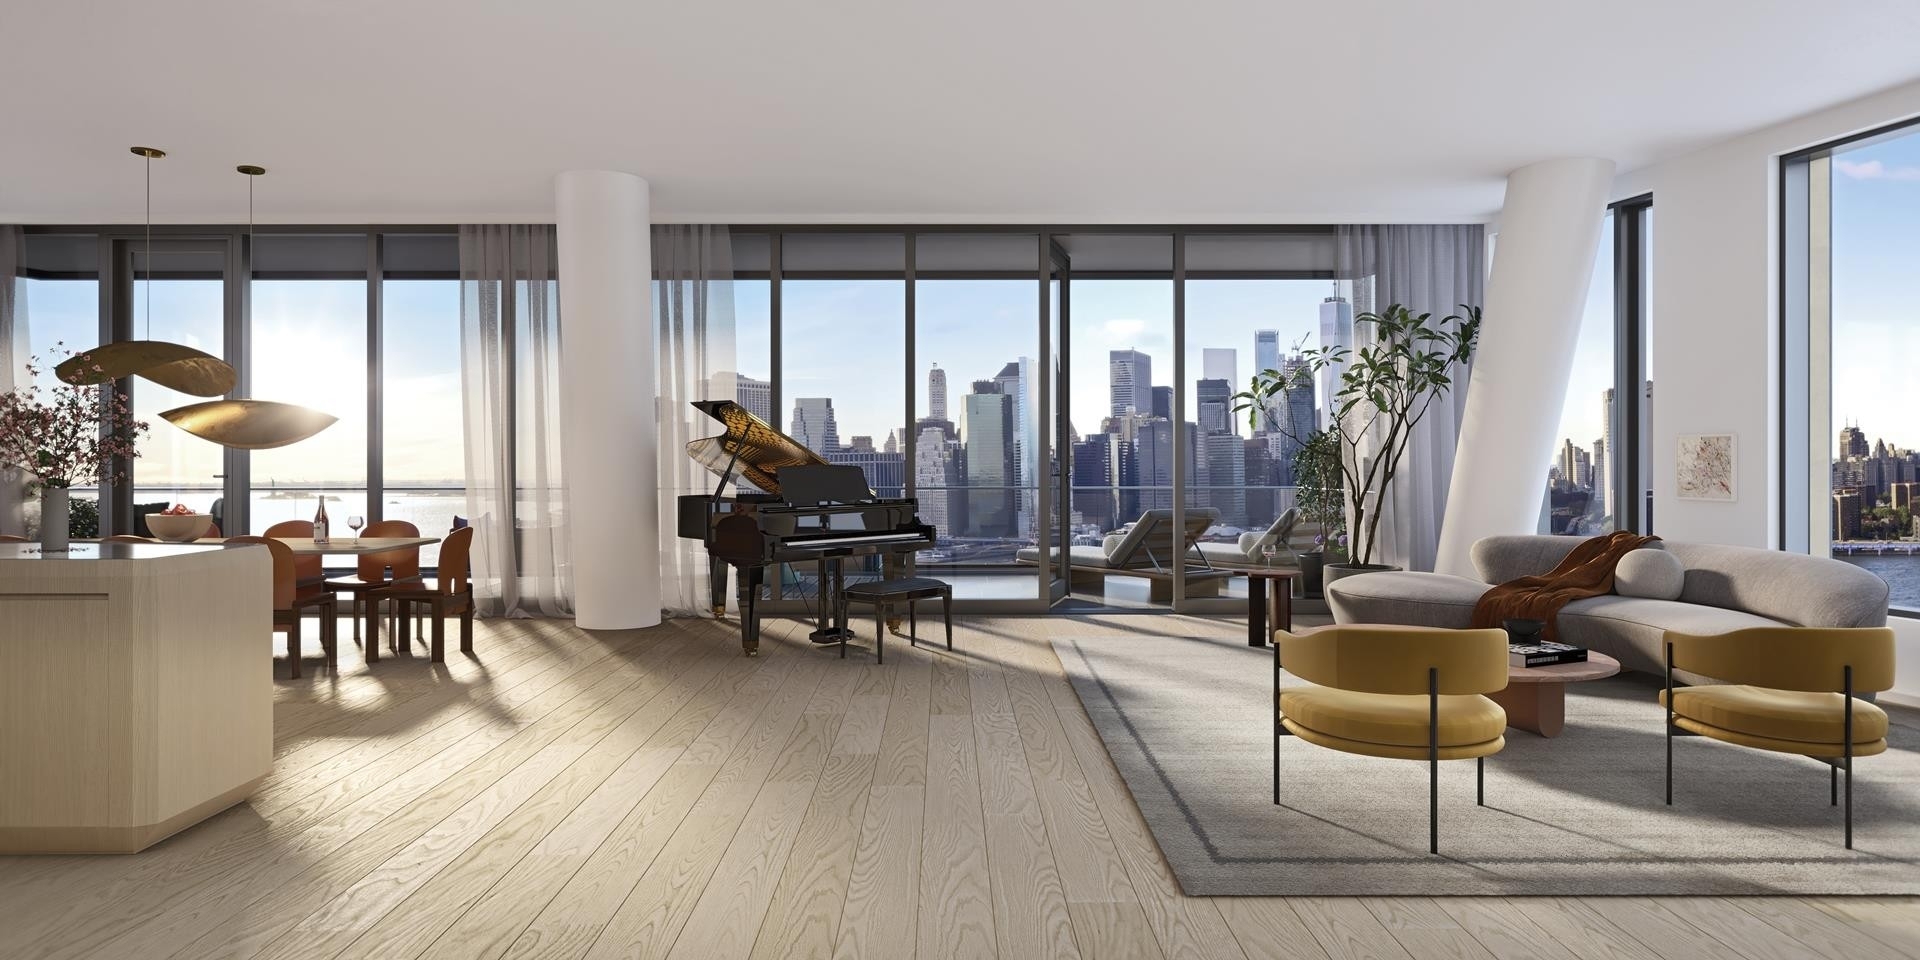 Condominium for Sale at Olympia Dumbo, 30 FRONT ST, 31A Brooklyn, NY 11201